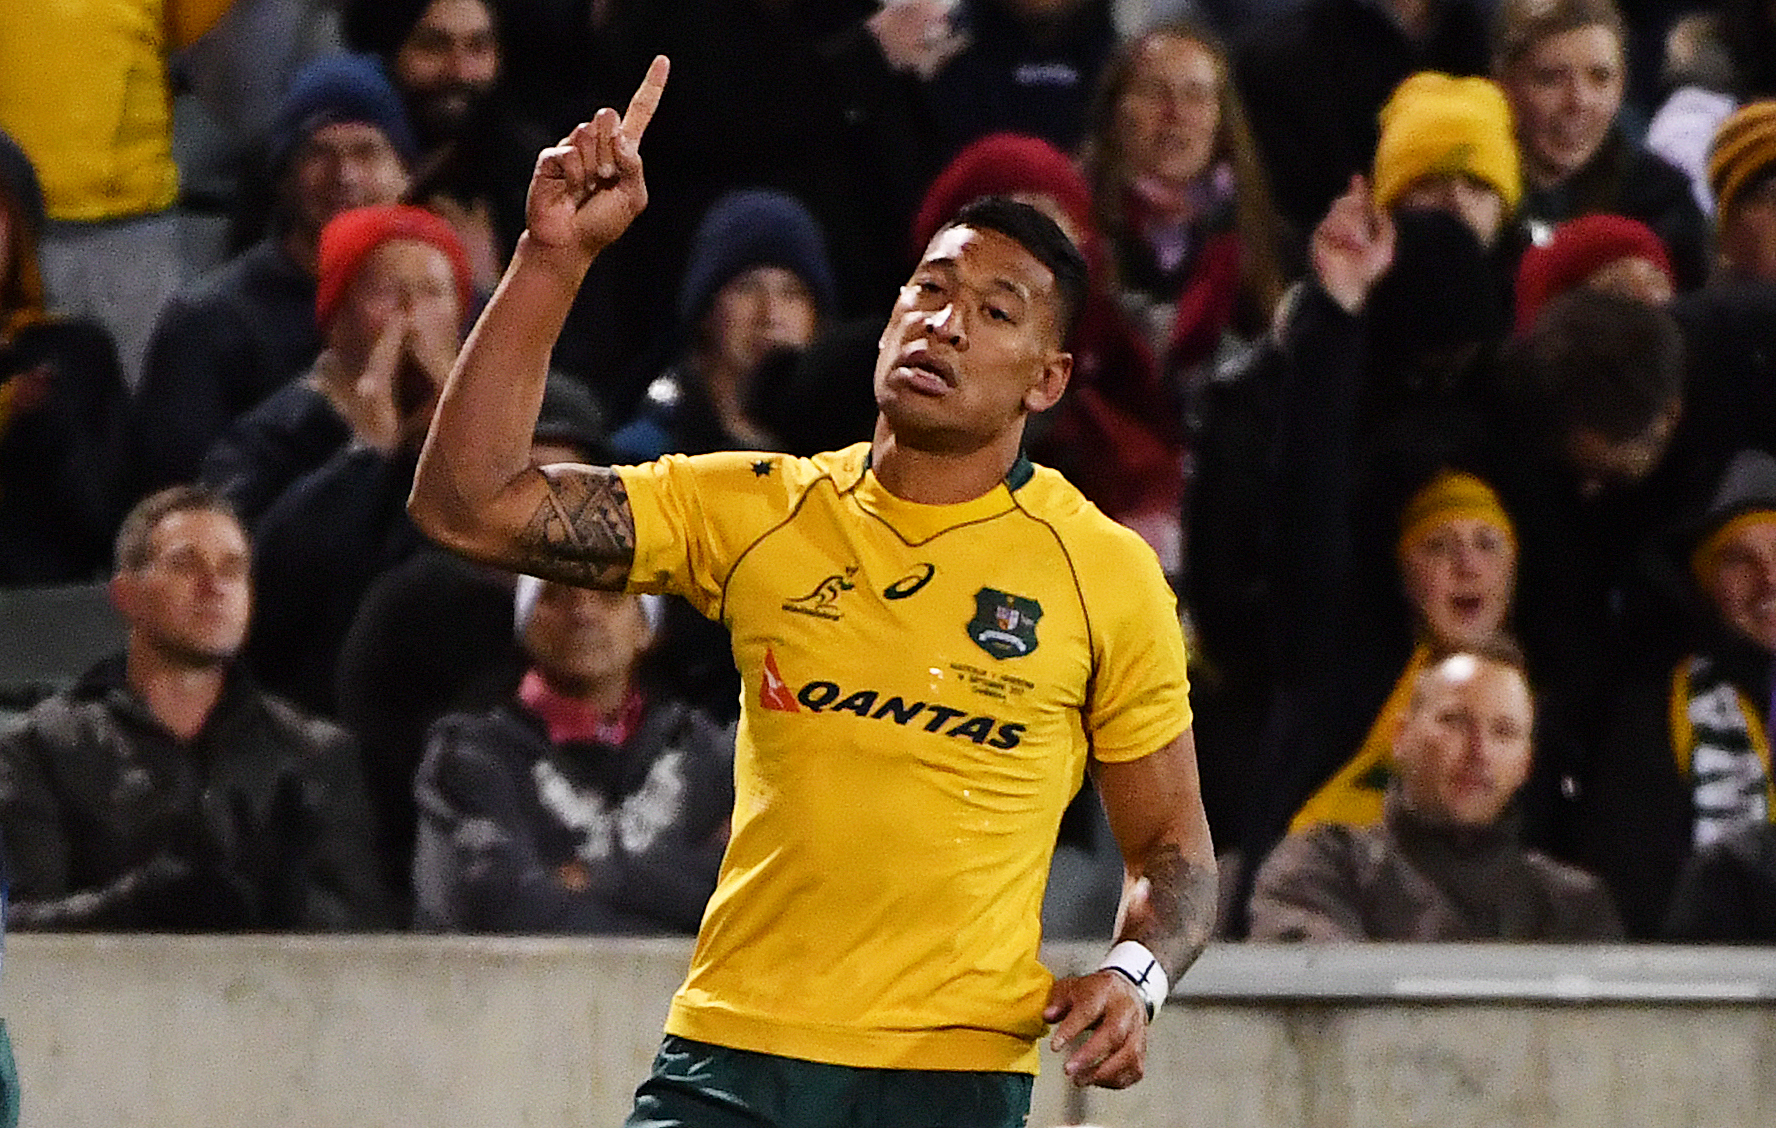 Article image for “I don’t agree with Folau’s views but he’s entitled to them”: Tom Elliott on rugby star’s controversial comments